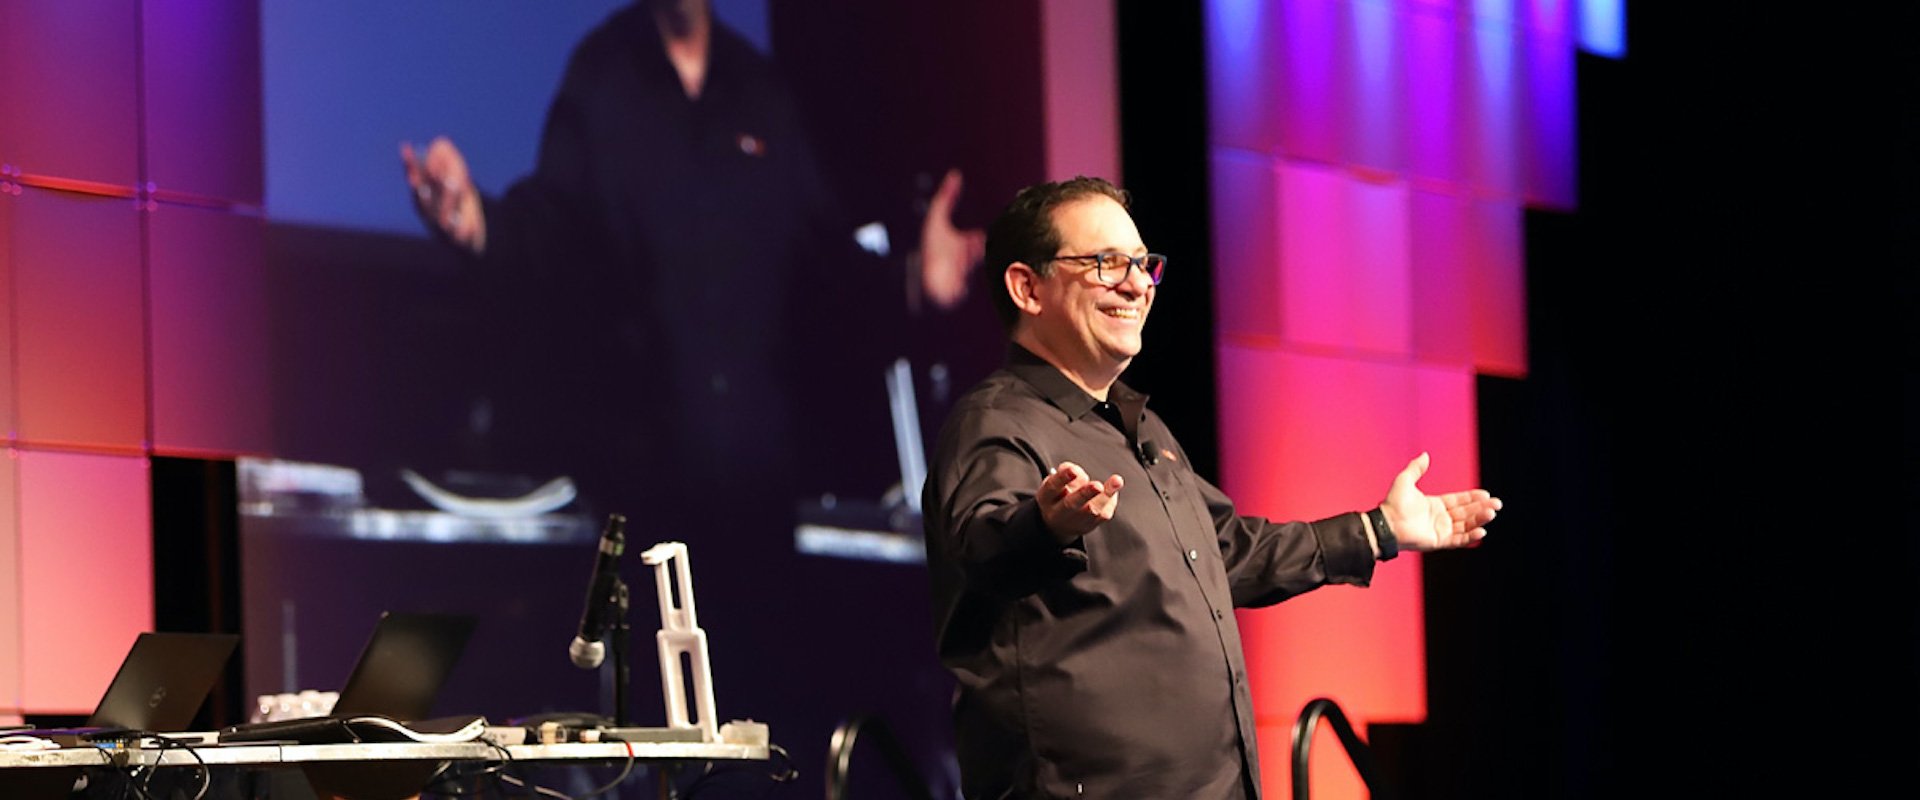 Kevin Mitnick speaking - 4 Ways to Combine Education & Entertainment at Your Next Corporate Event